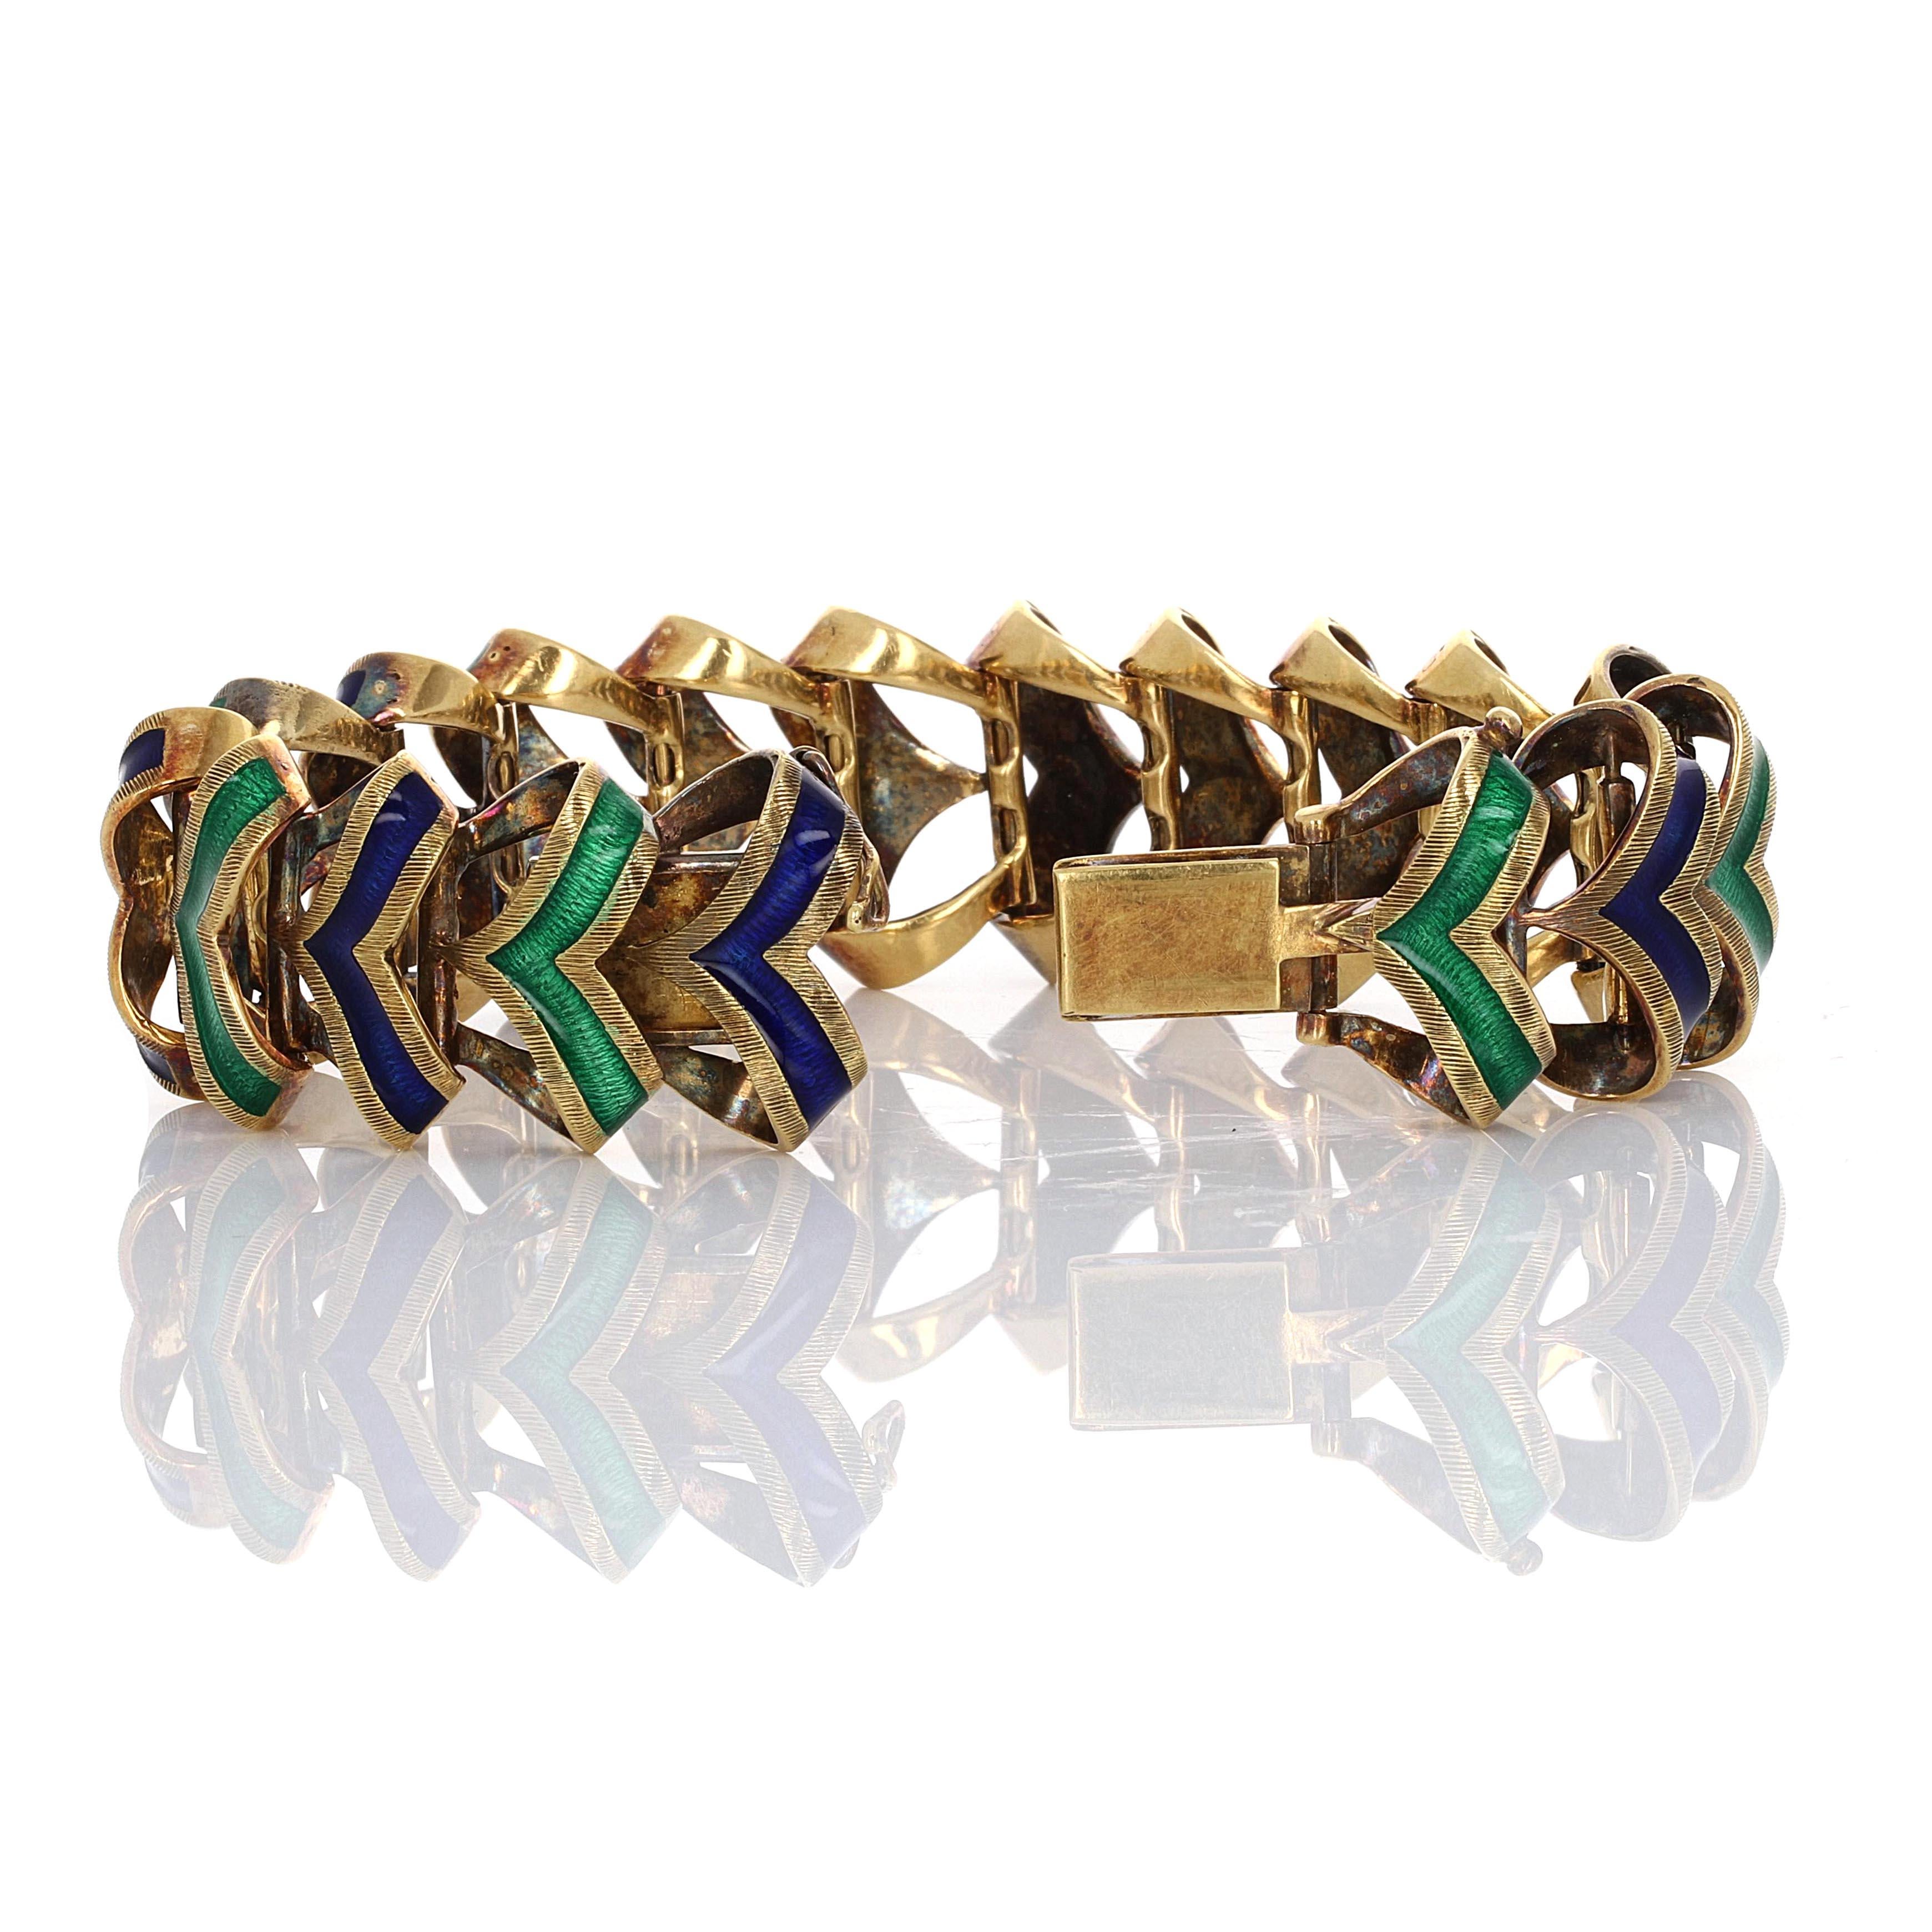 1960's, two tone enamel link 18 karat yellow gold bracelet. The beautiful enamel links alternate in color, emerald green and cobalt blue. The bracelet is hand crafted with a woven braid chevron design. 

Bracelet is 7 inches in length and 7/8 inch